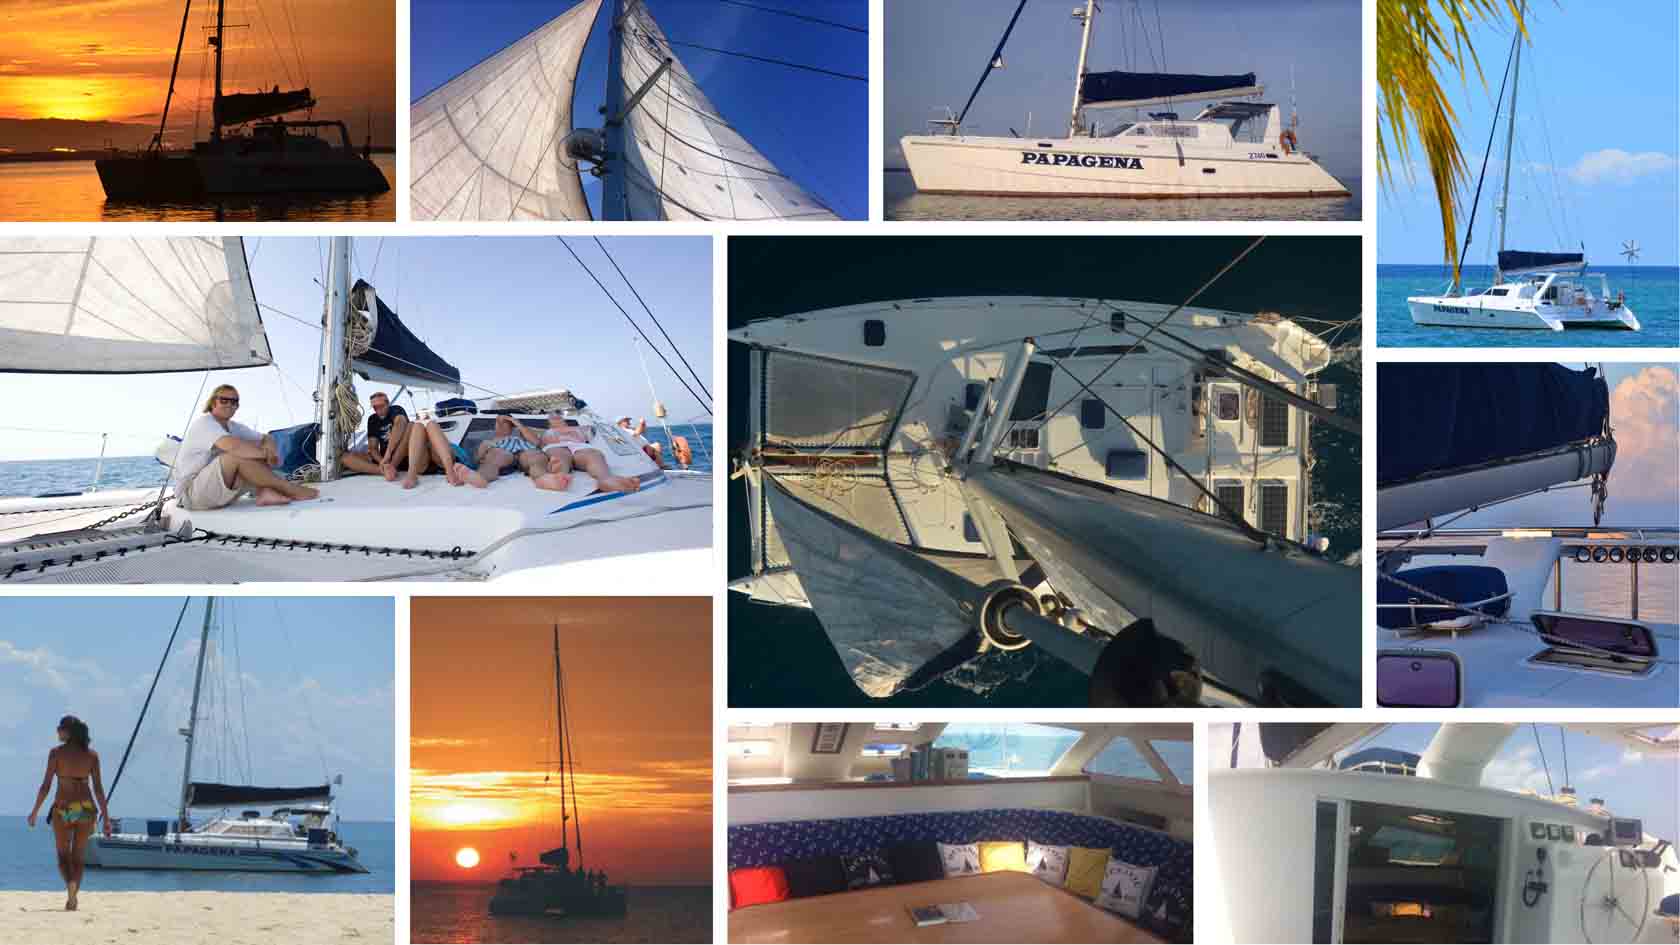 Collage of Yacht Papagena Pictures showing inside and people having fun sailing with stunning images of the sunset